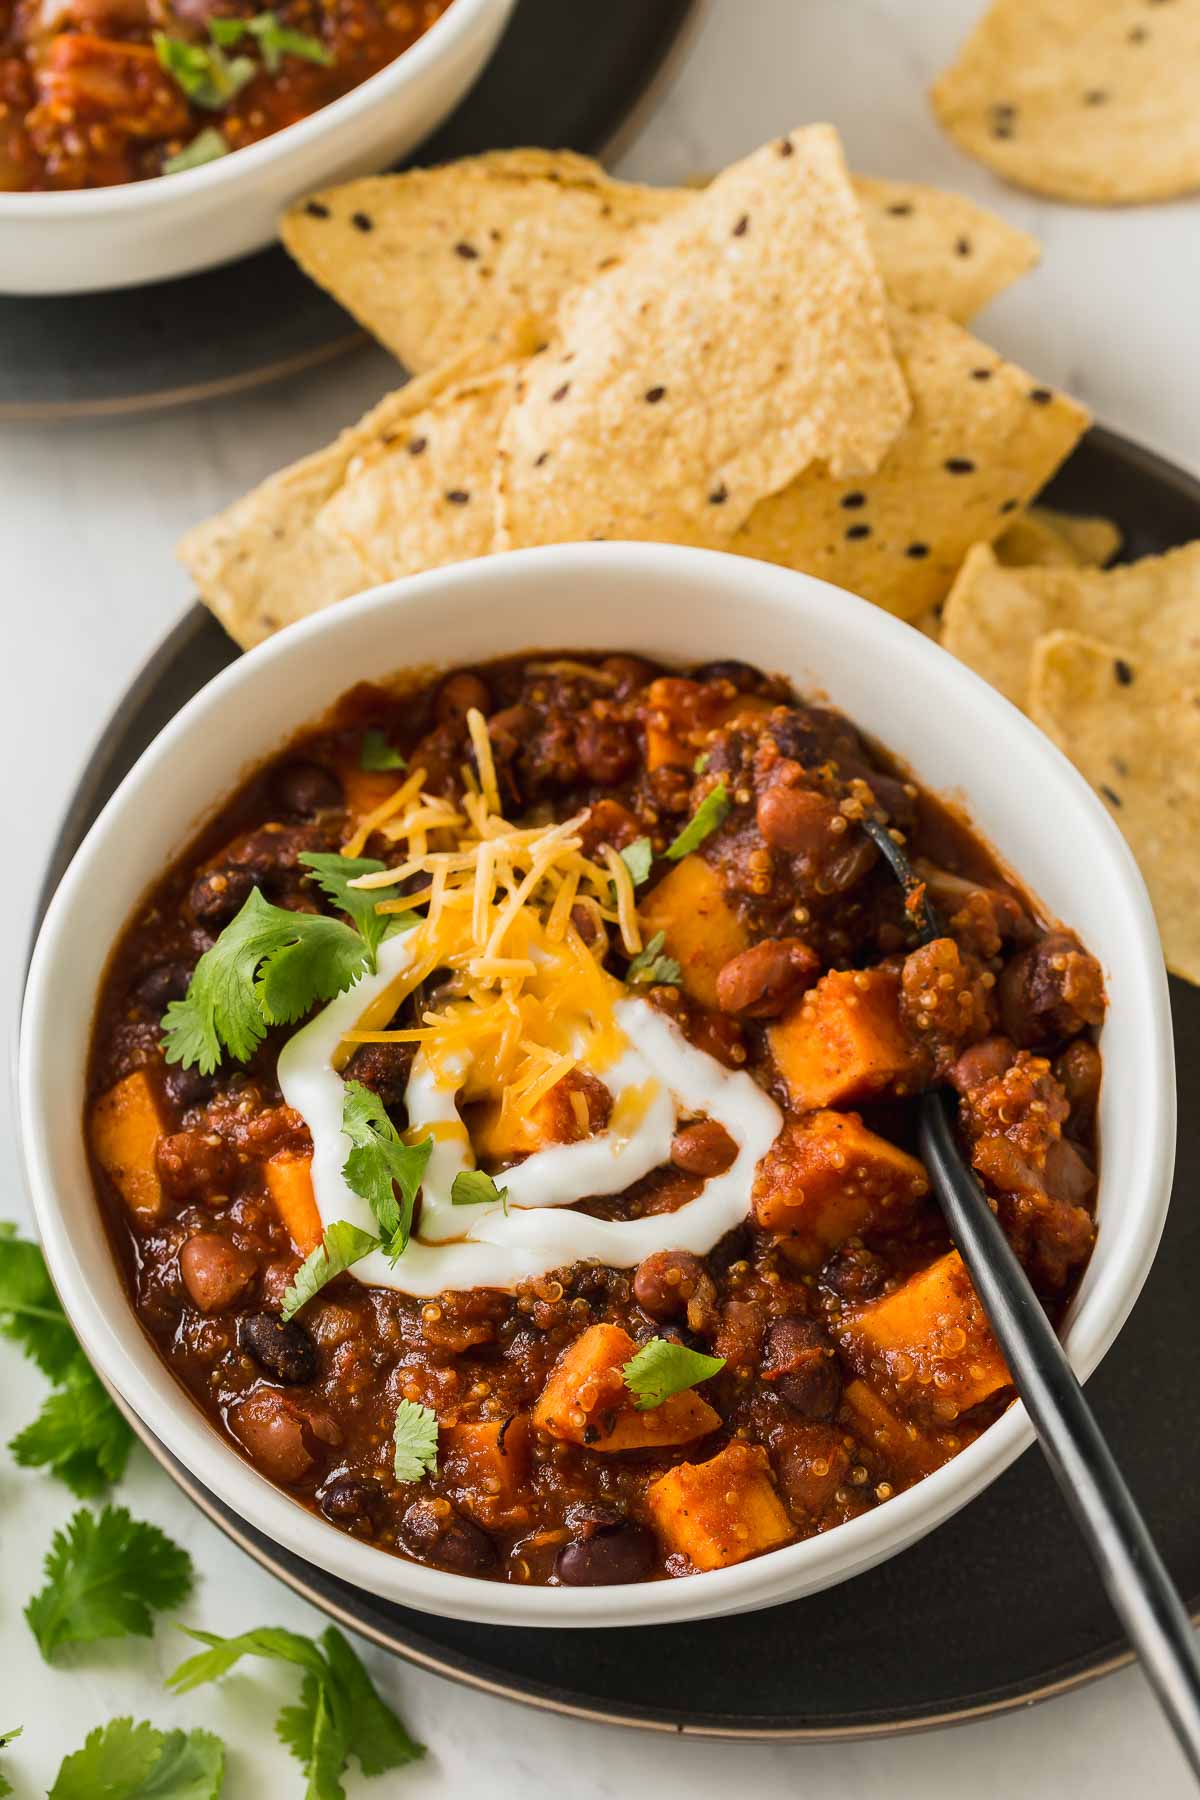 Bowl of chili with spoon and tortilla chips on side.